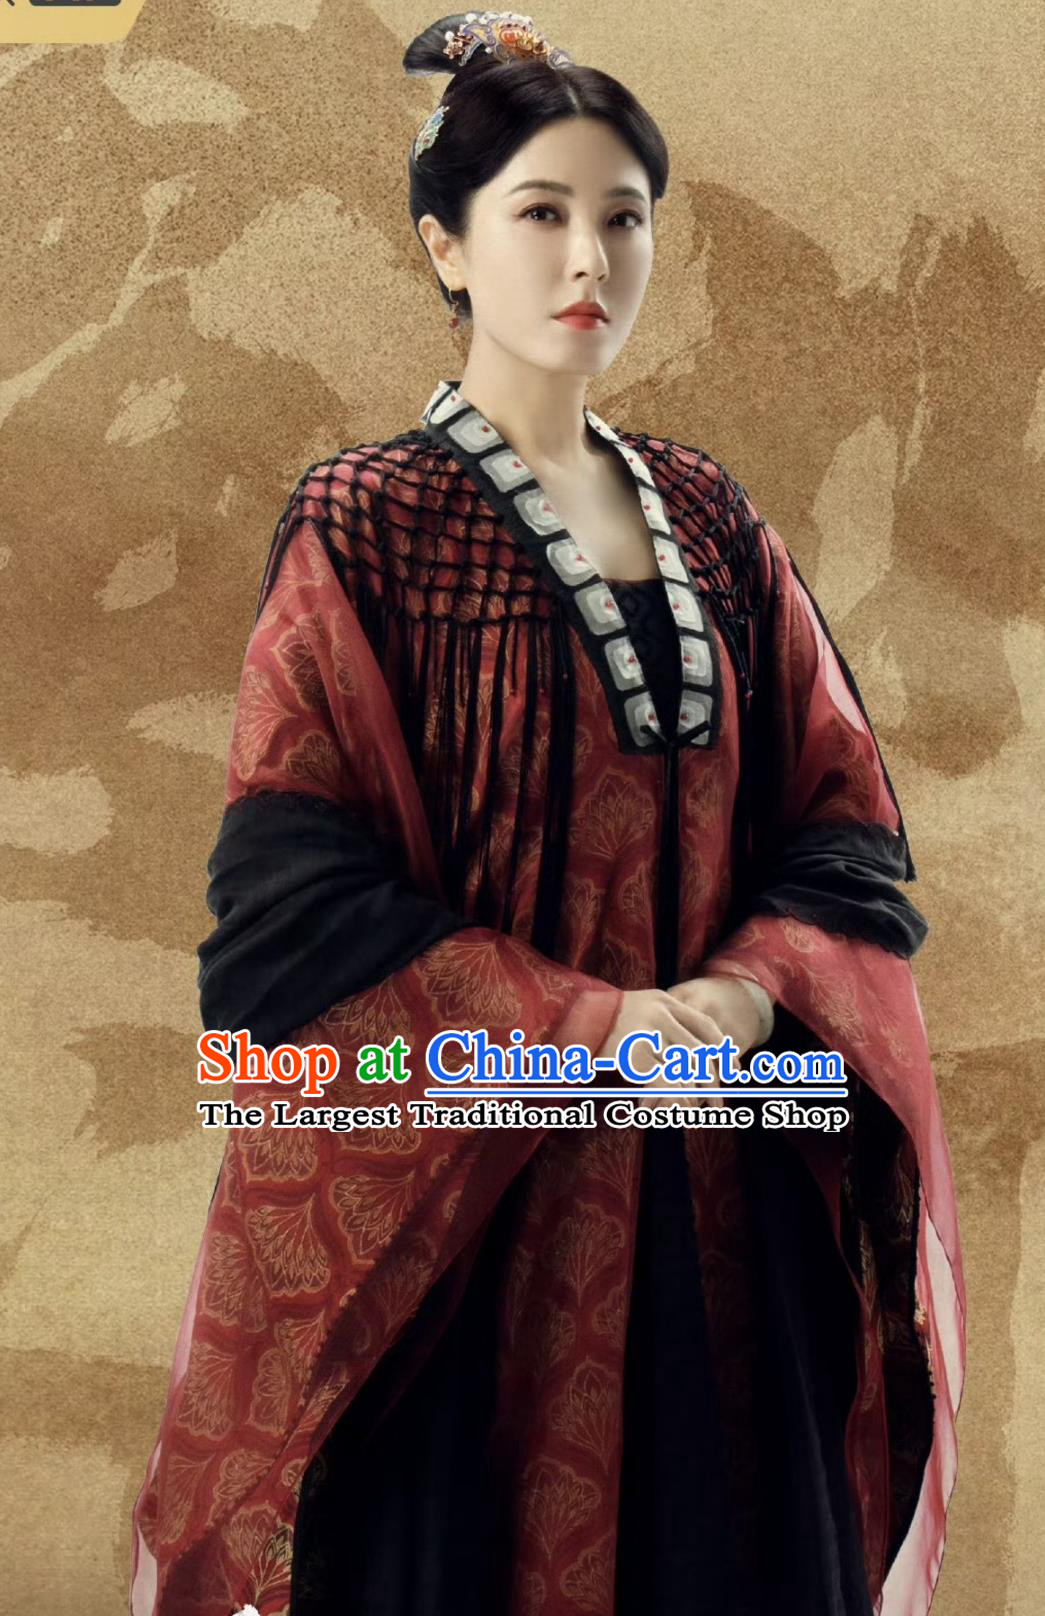 Historical TV Series Ripe Town Courtesan Lin SI Niang Clothing Chinese Ancient Woman Dress Costumes